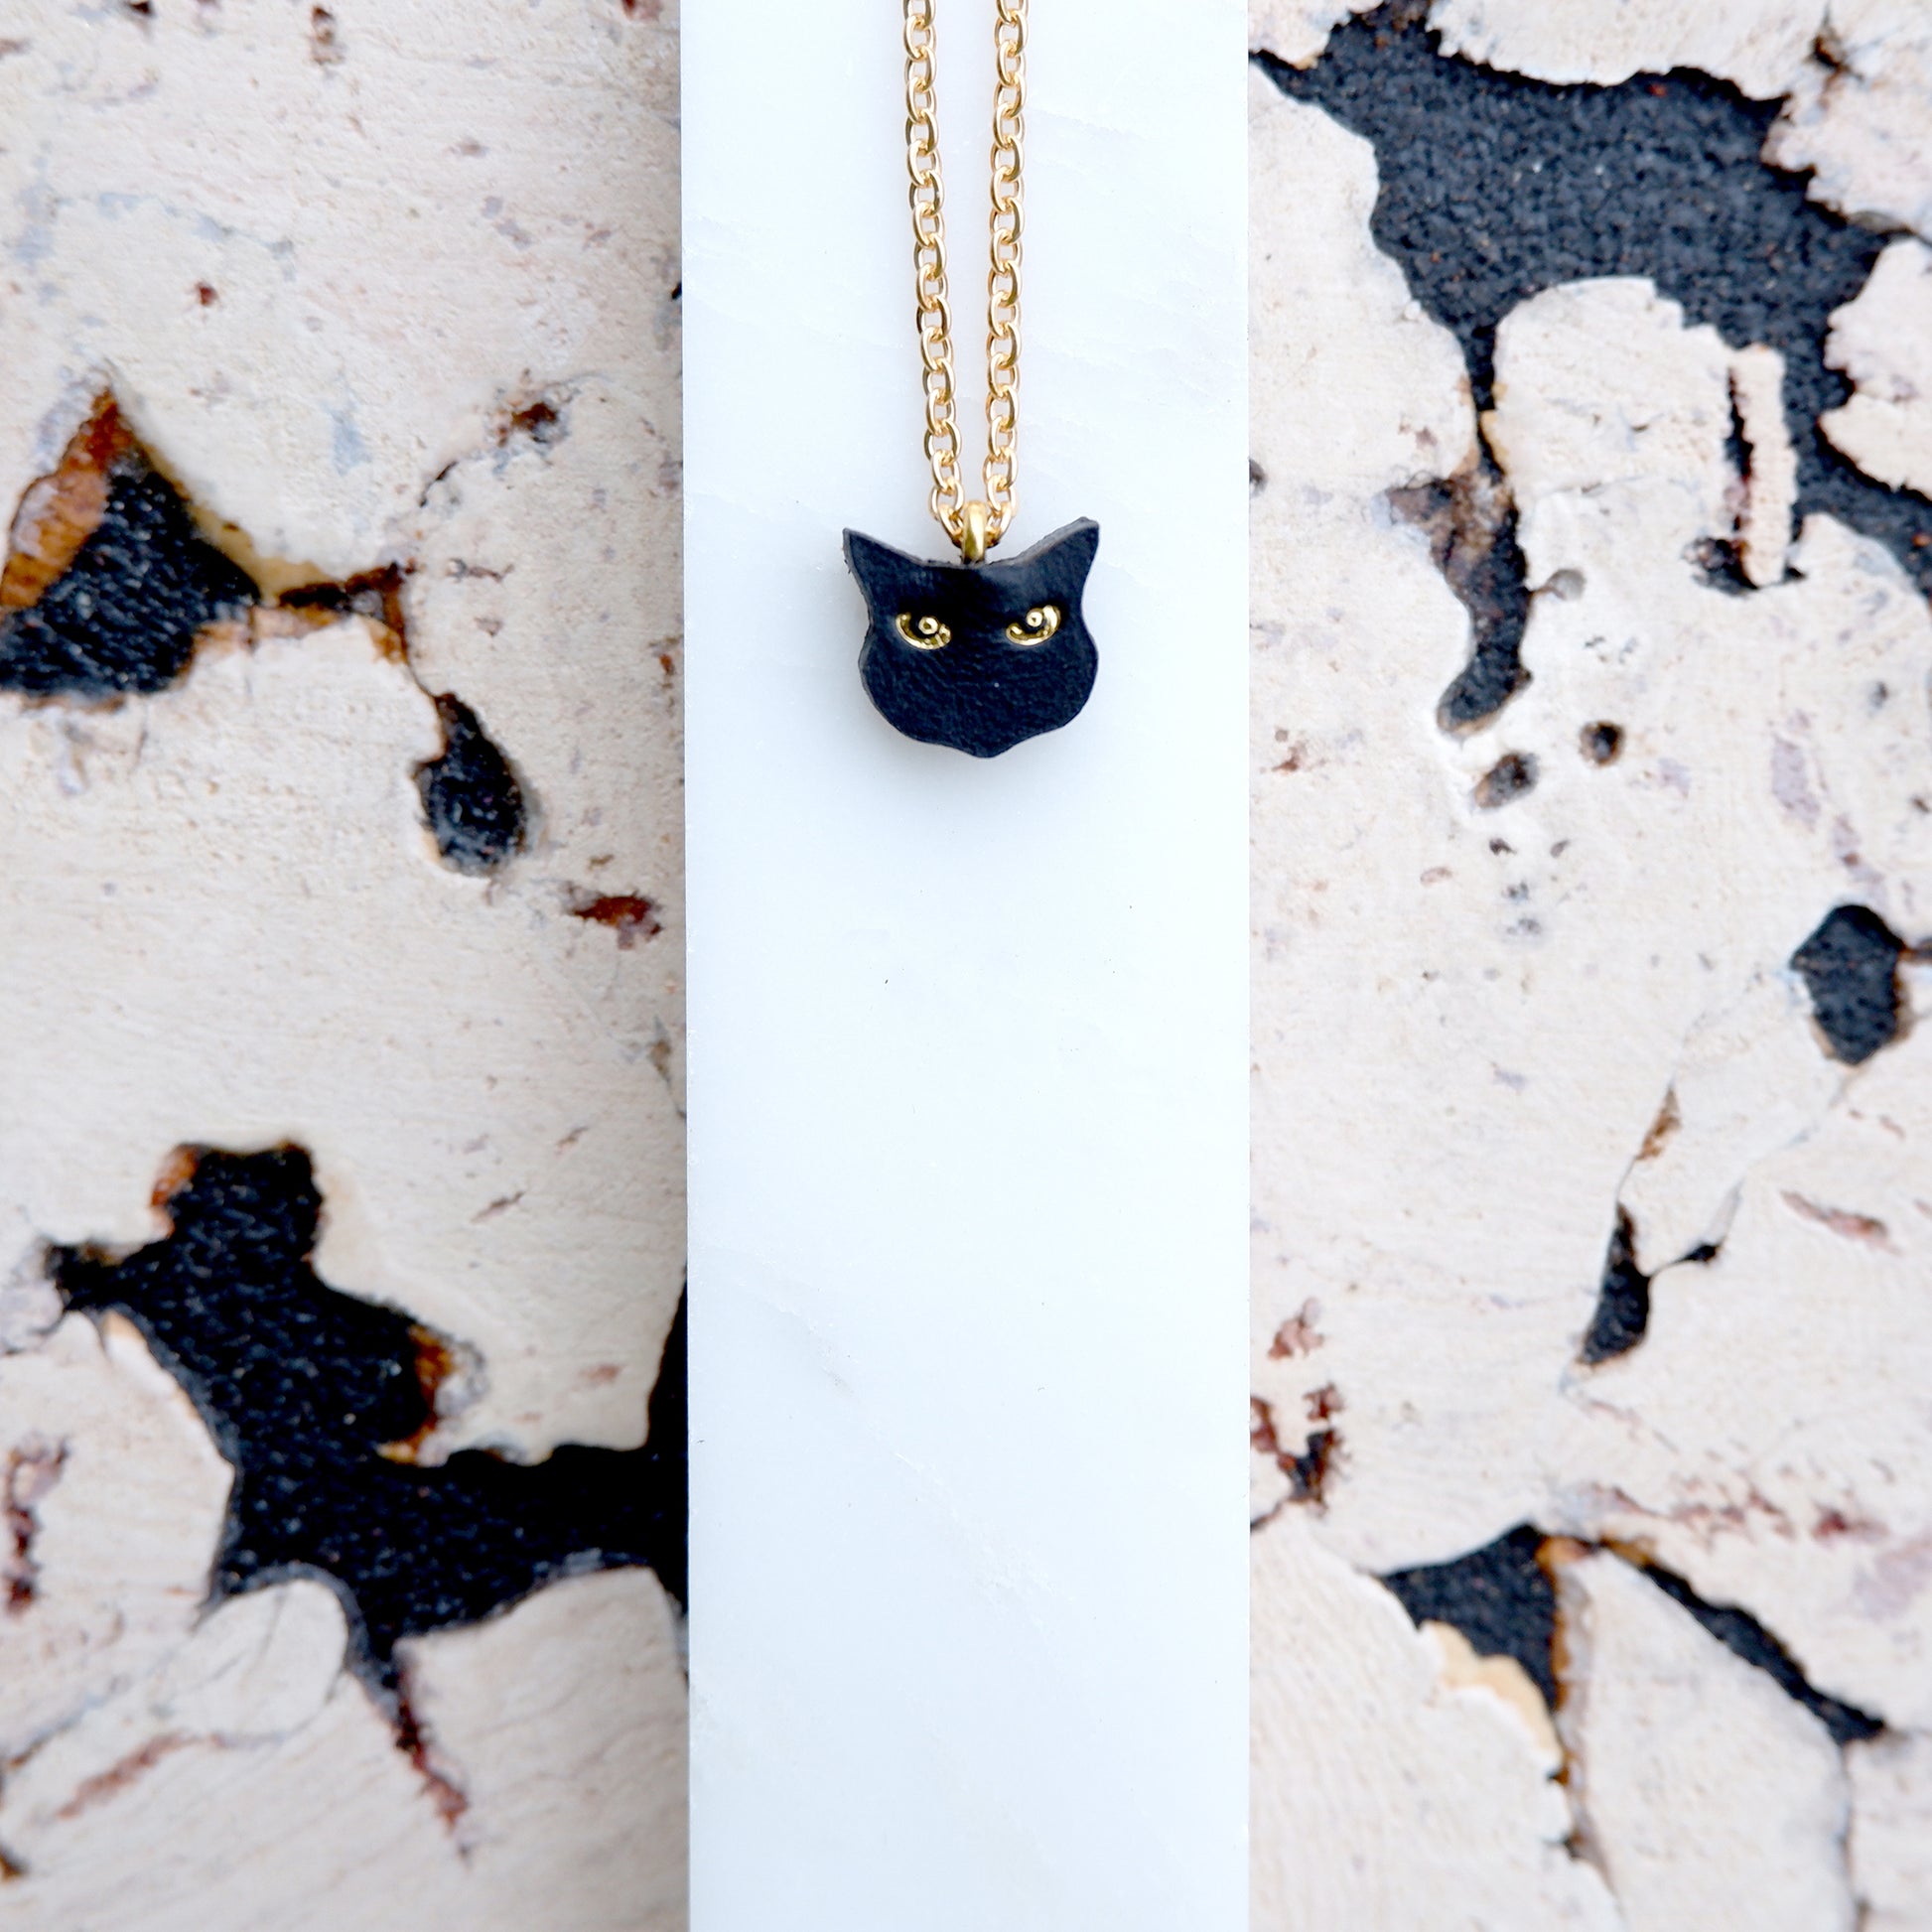 Little Black Cat Head Pendant with gold eyes on fine gold chain